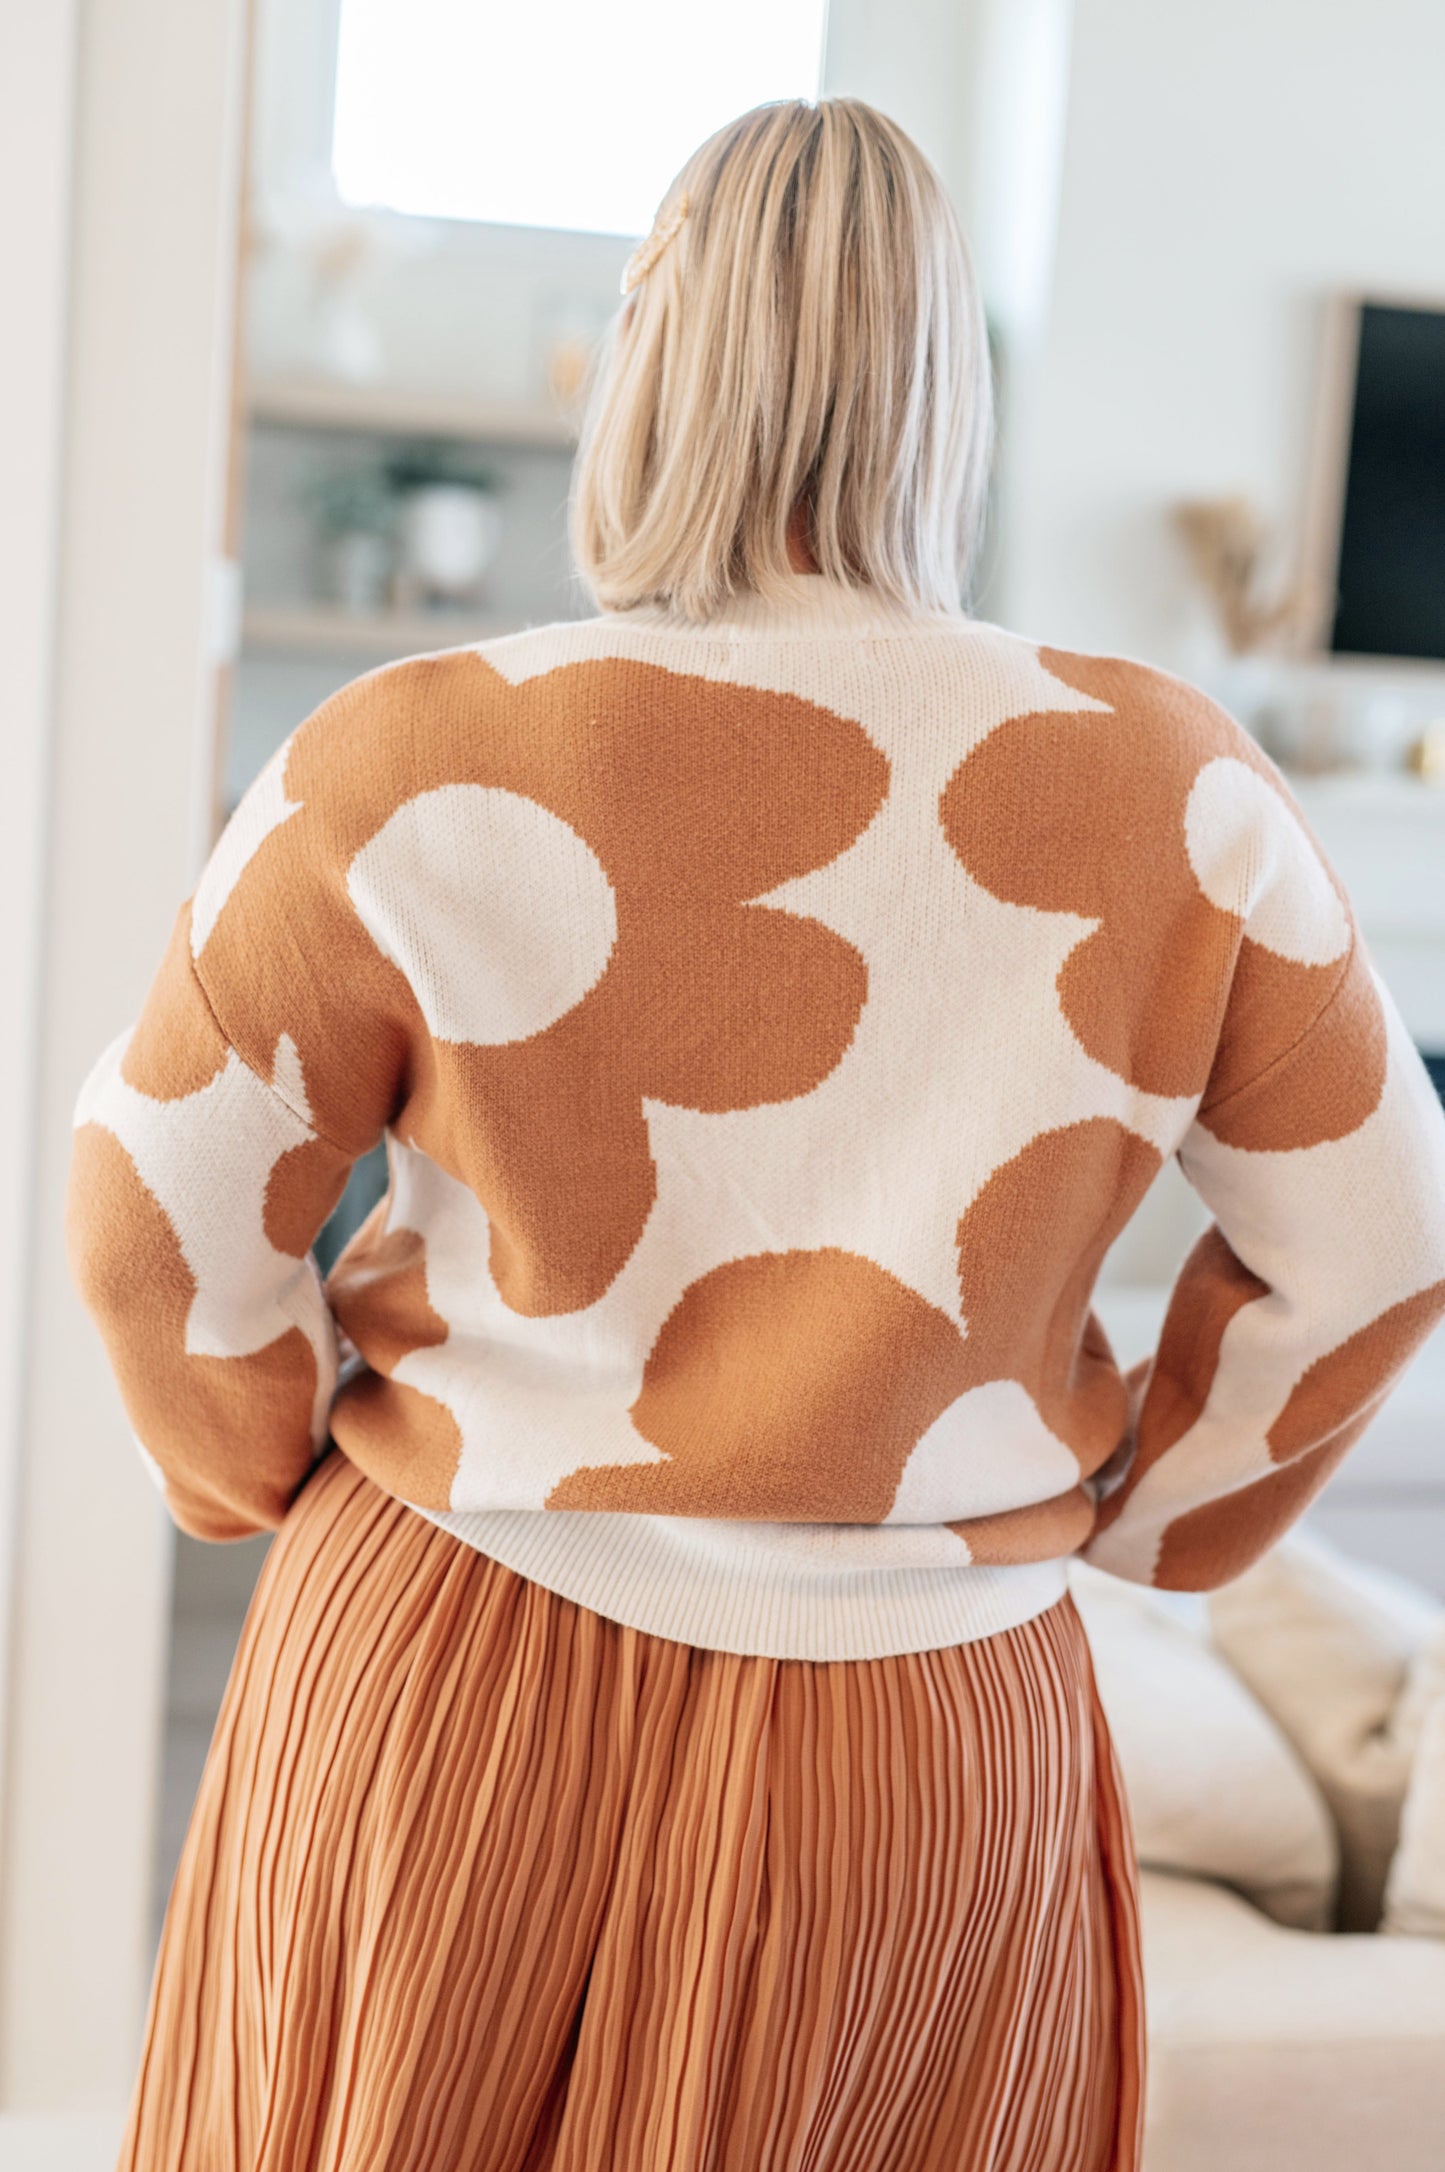 Daisy Sized Mod Floral Sweater